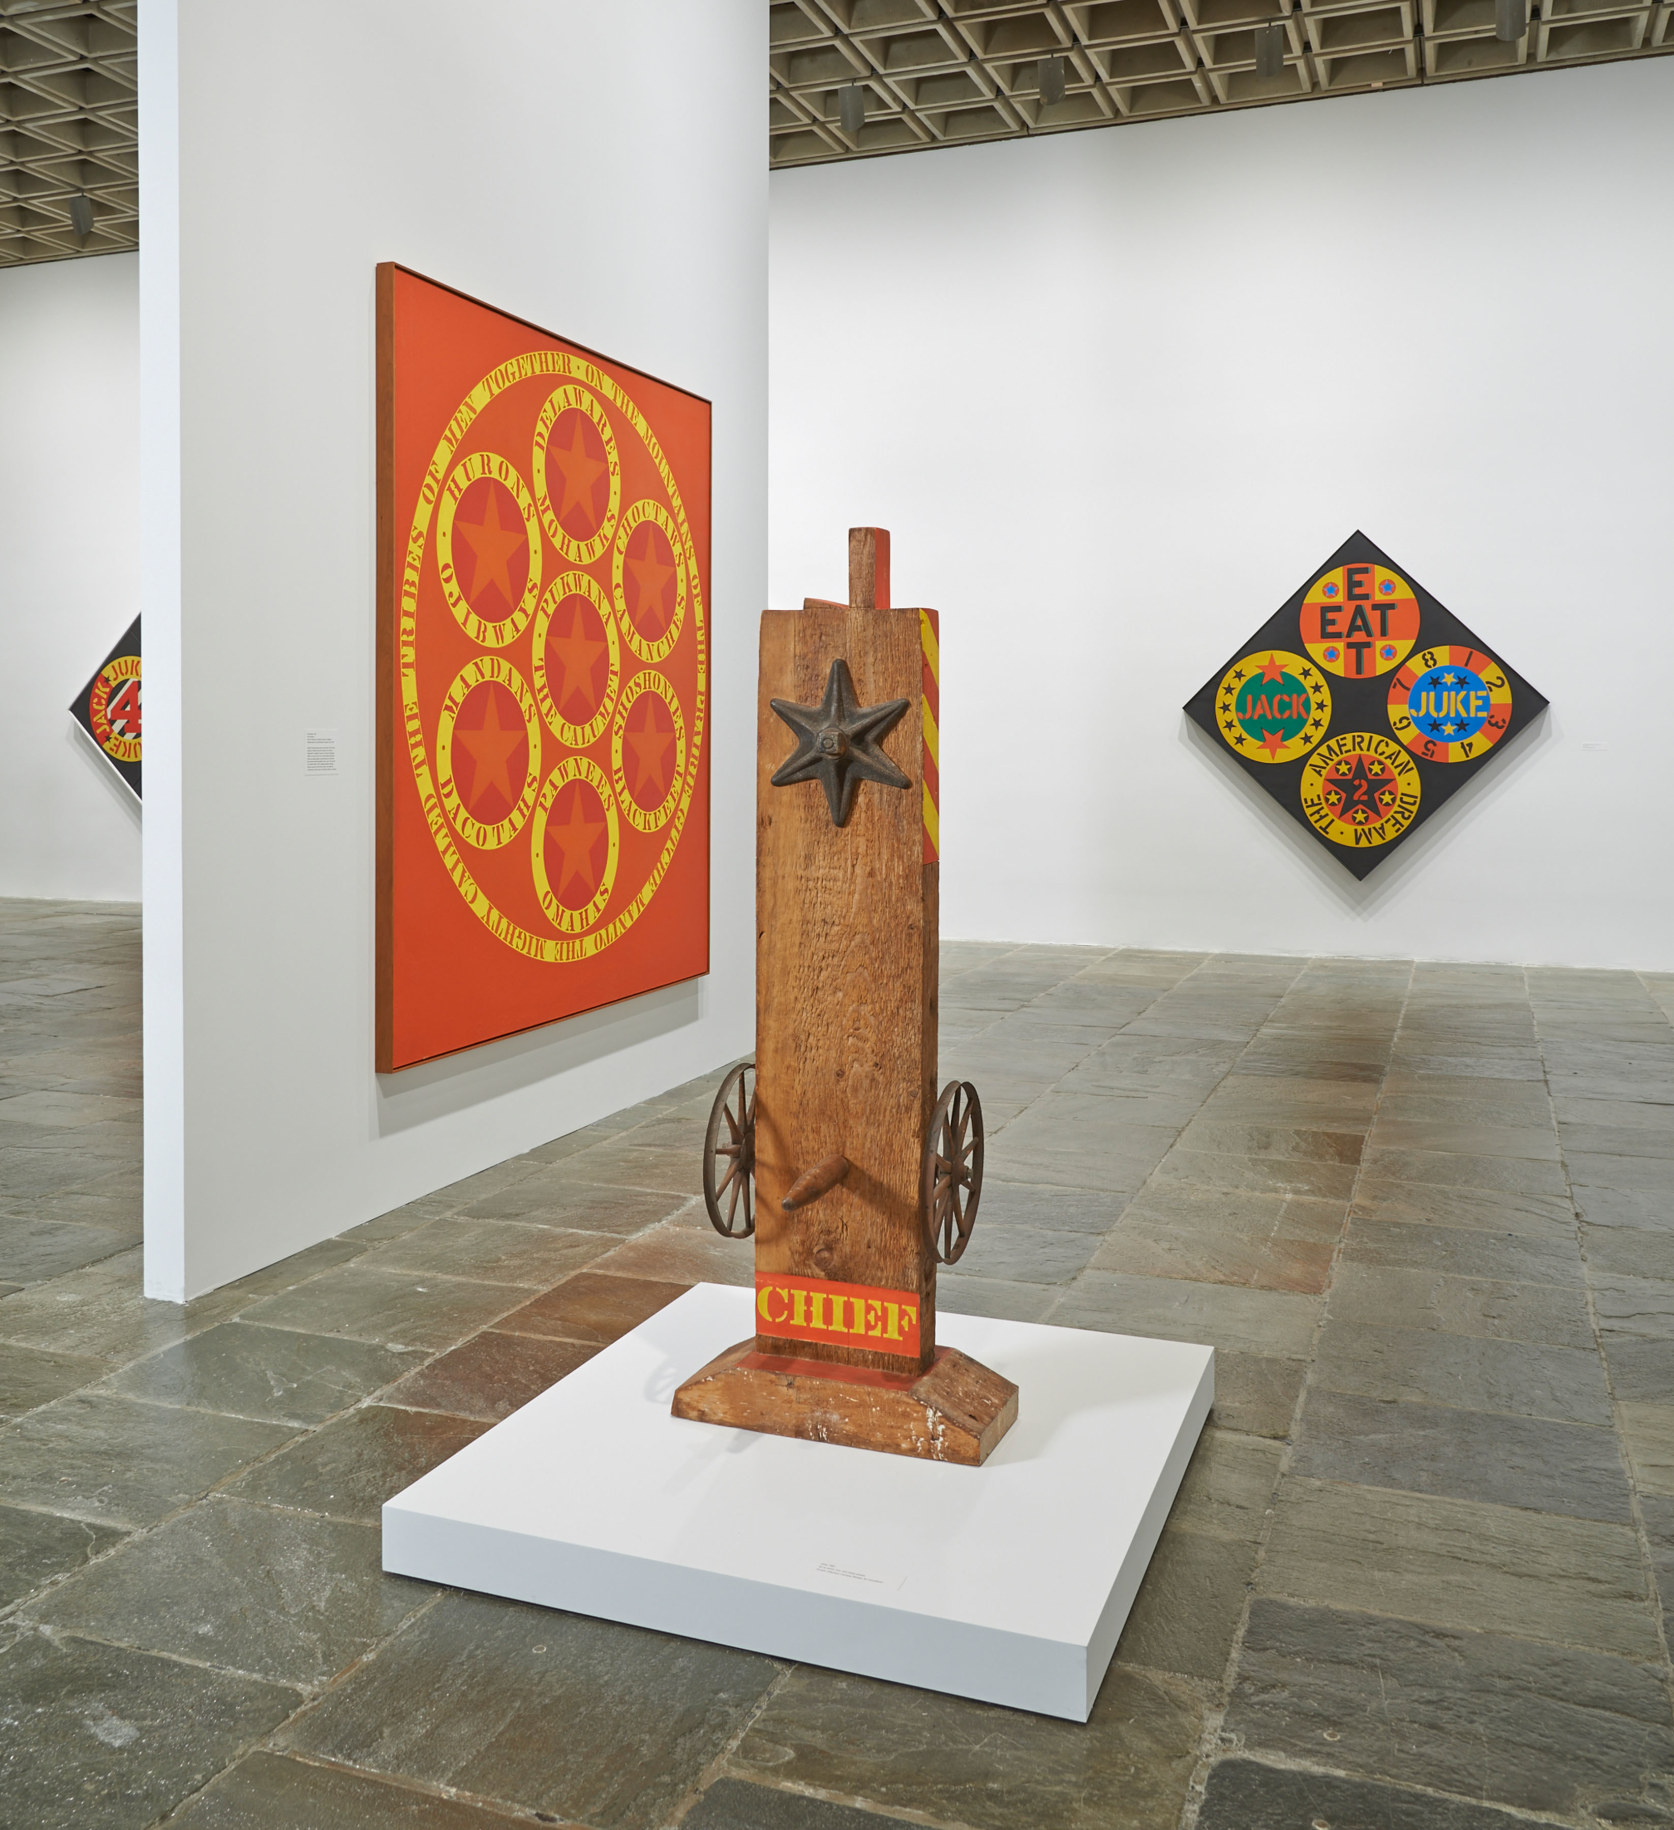 Installation view of&nbsp;Robert Indiana: Beyond LOVE, Whitney Museum of American Art, New York, September 26, 2013&ndash;January 5, 2014. Left to right, The Calumet (1961), Chief (1962), and The Black Diamond American Dream #2 (1962), &nbsp;